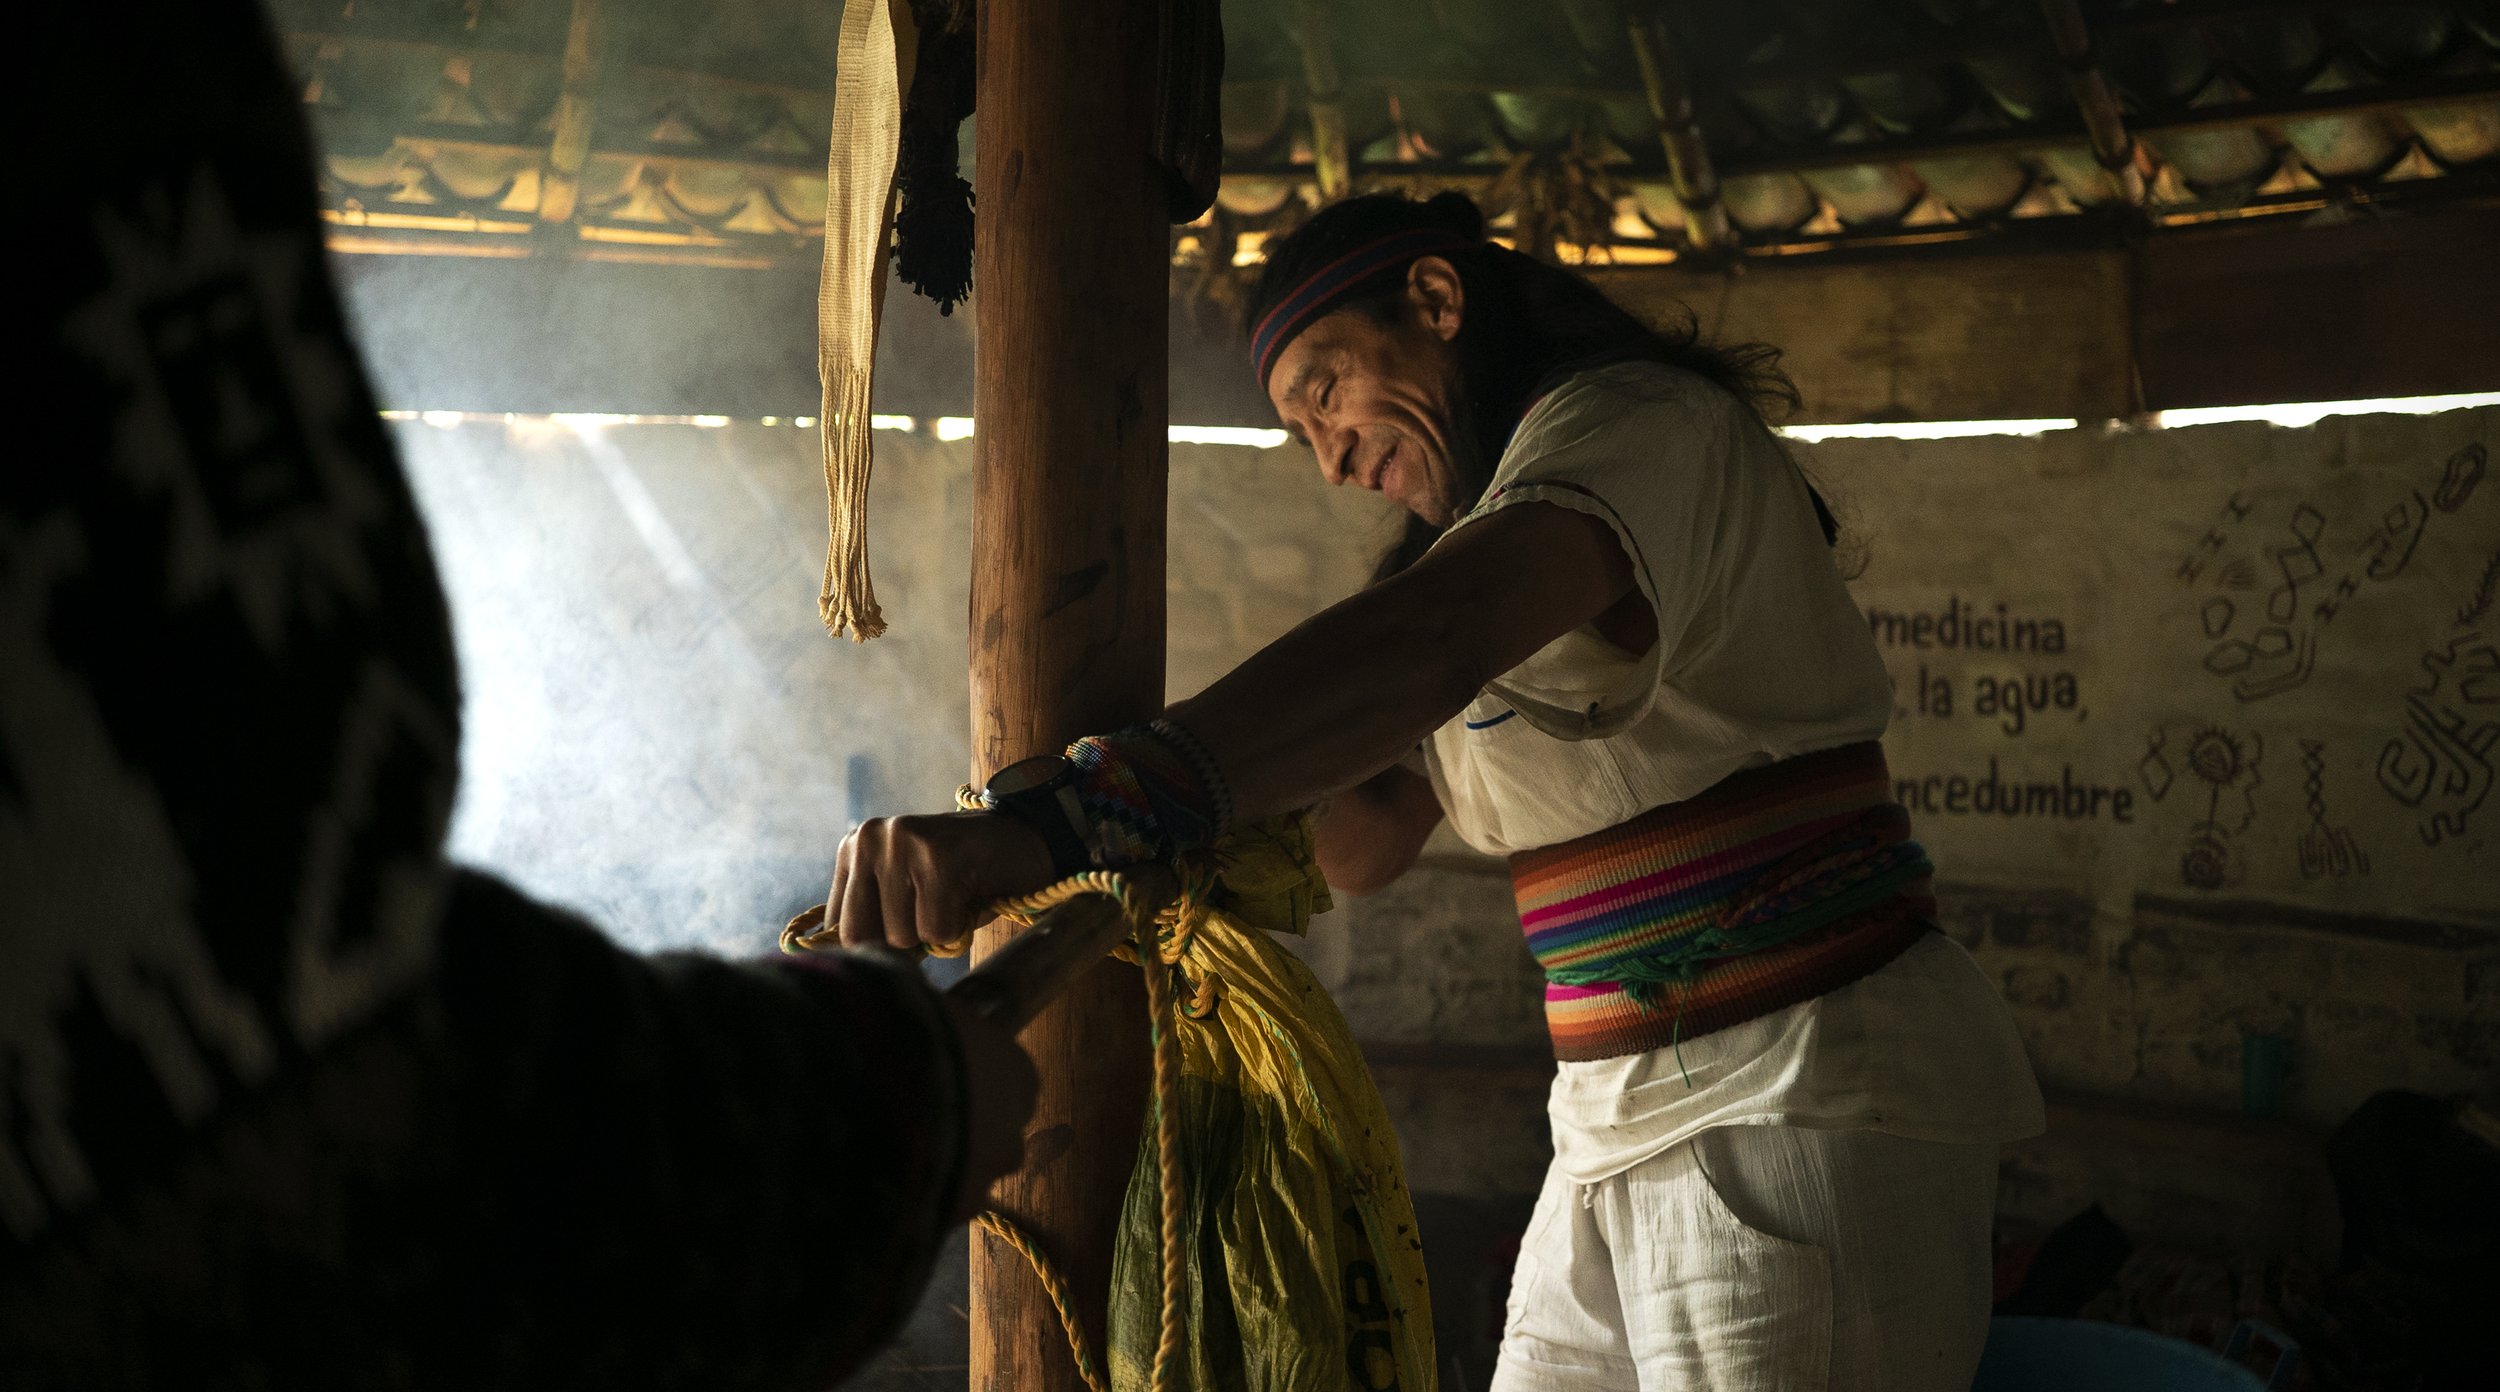 As part of the regular customs of the community, there are profound spiritual practices such as dancing, singing, and the use of sacred plants such as coca leaf and tobacco.